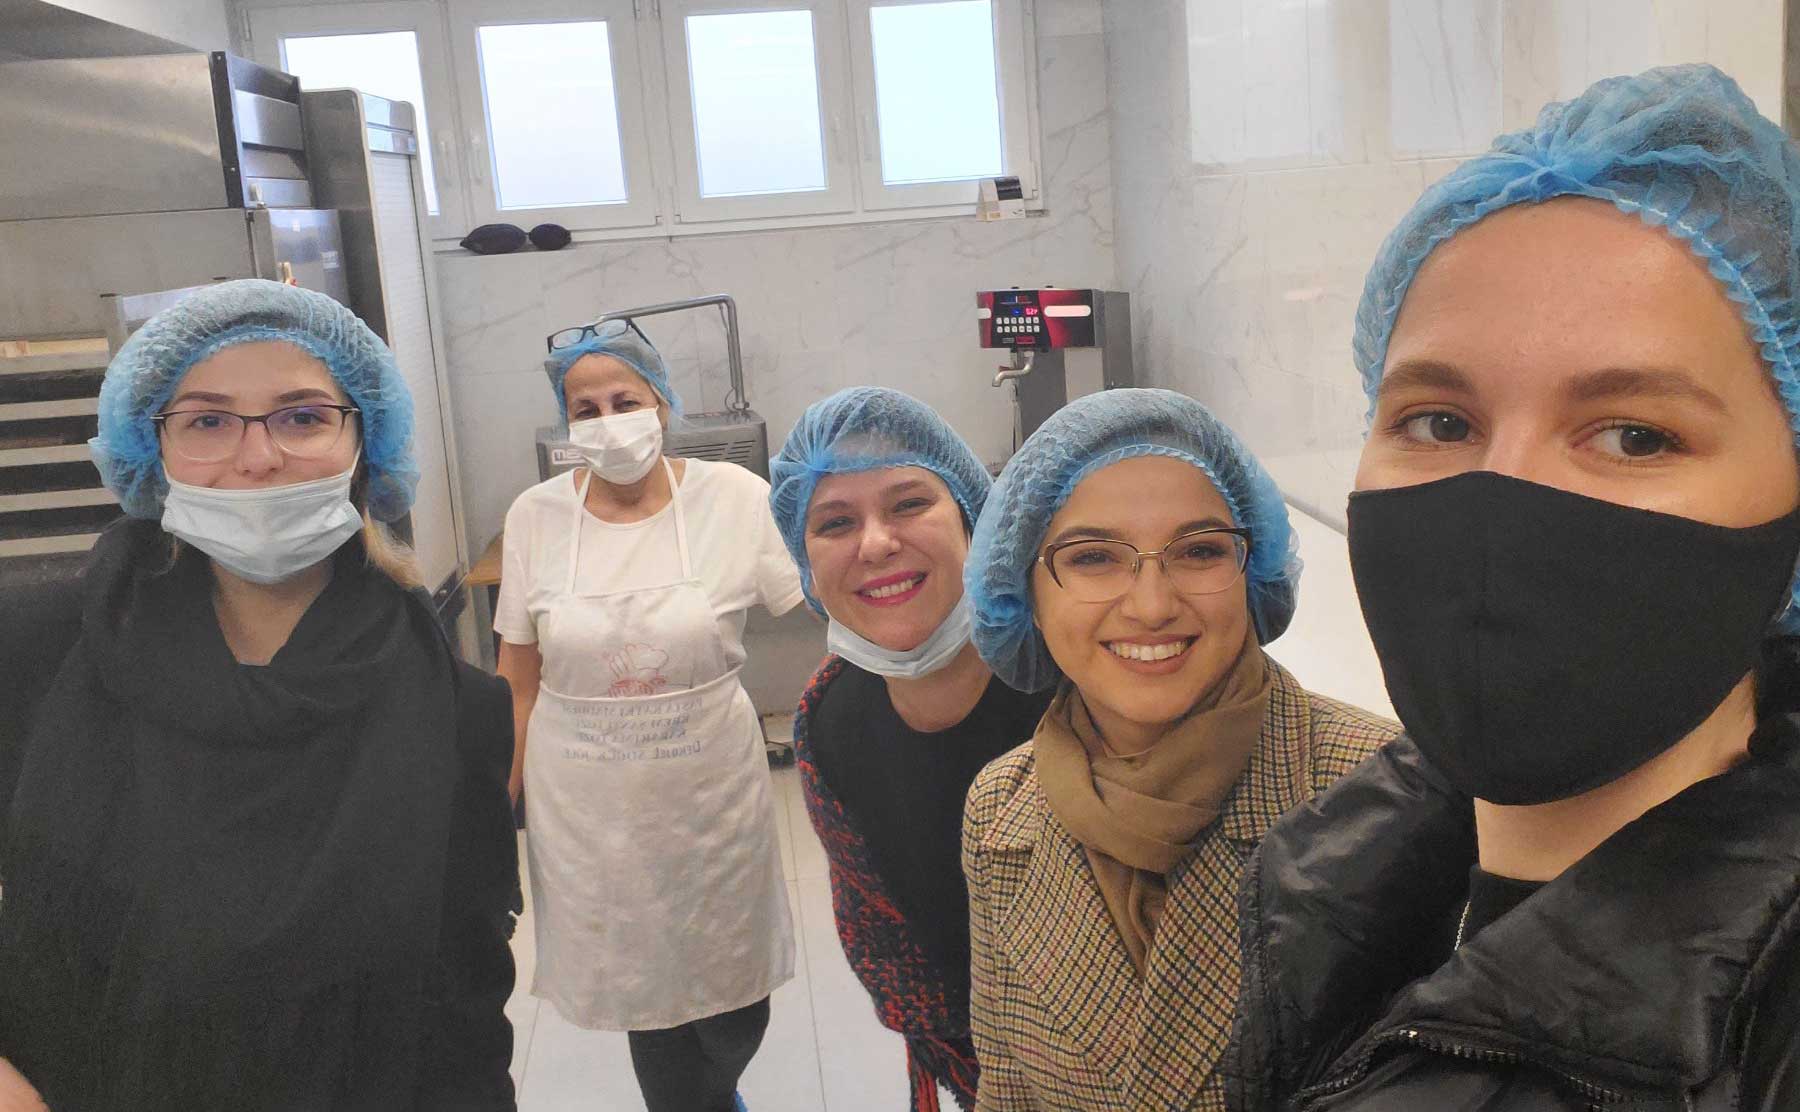 Chocolate Corner owner Bleta Zeqiri and her employees present the equipment and chocolates at their factory in Kosovo.